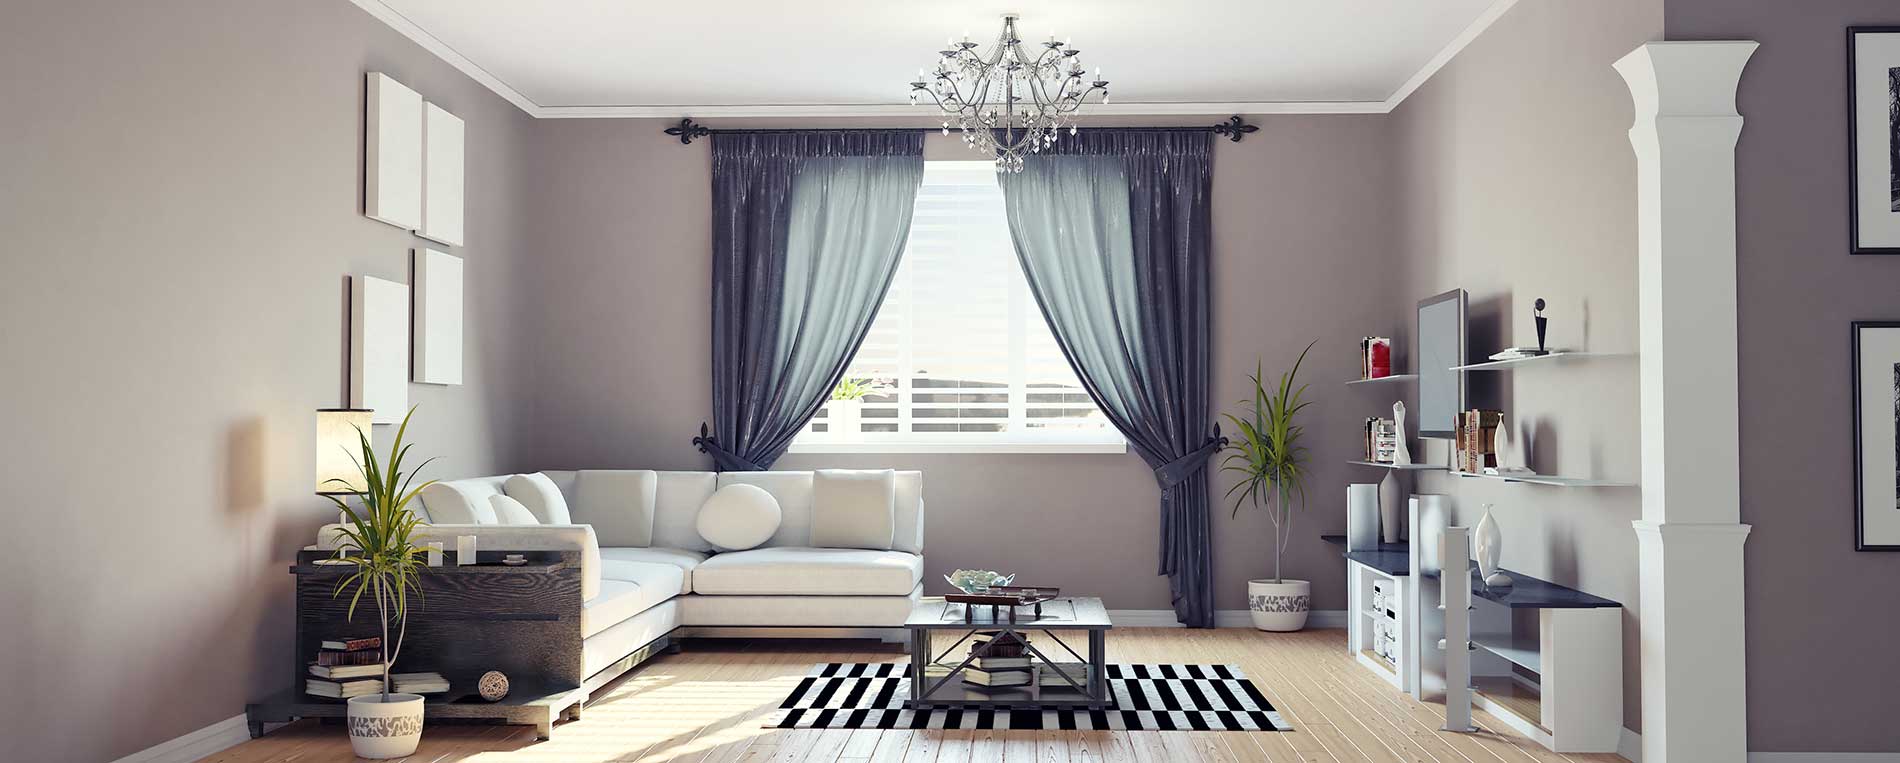 Perfect Sheer Roller Shades For San Mateo Room